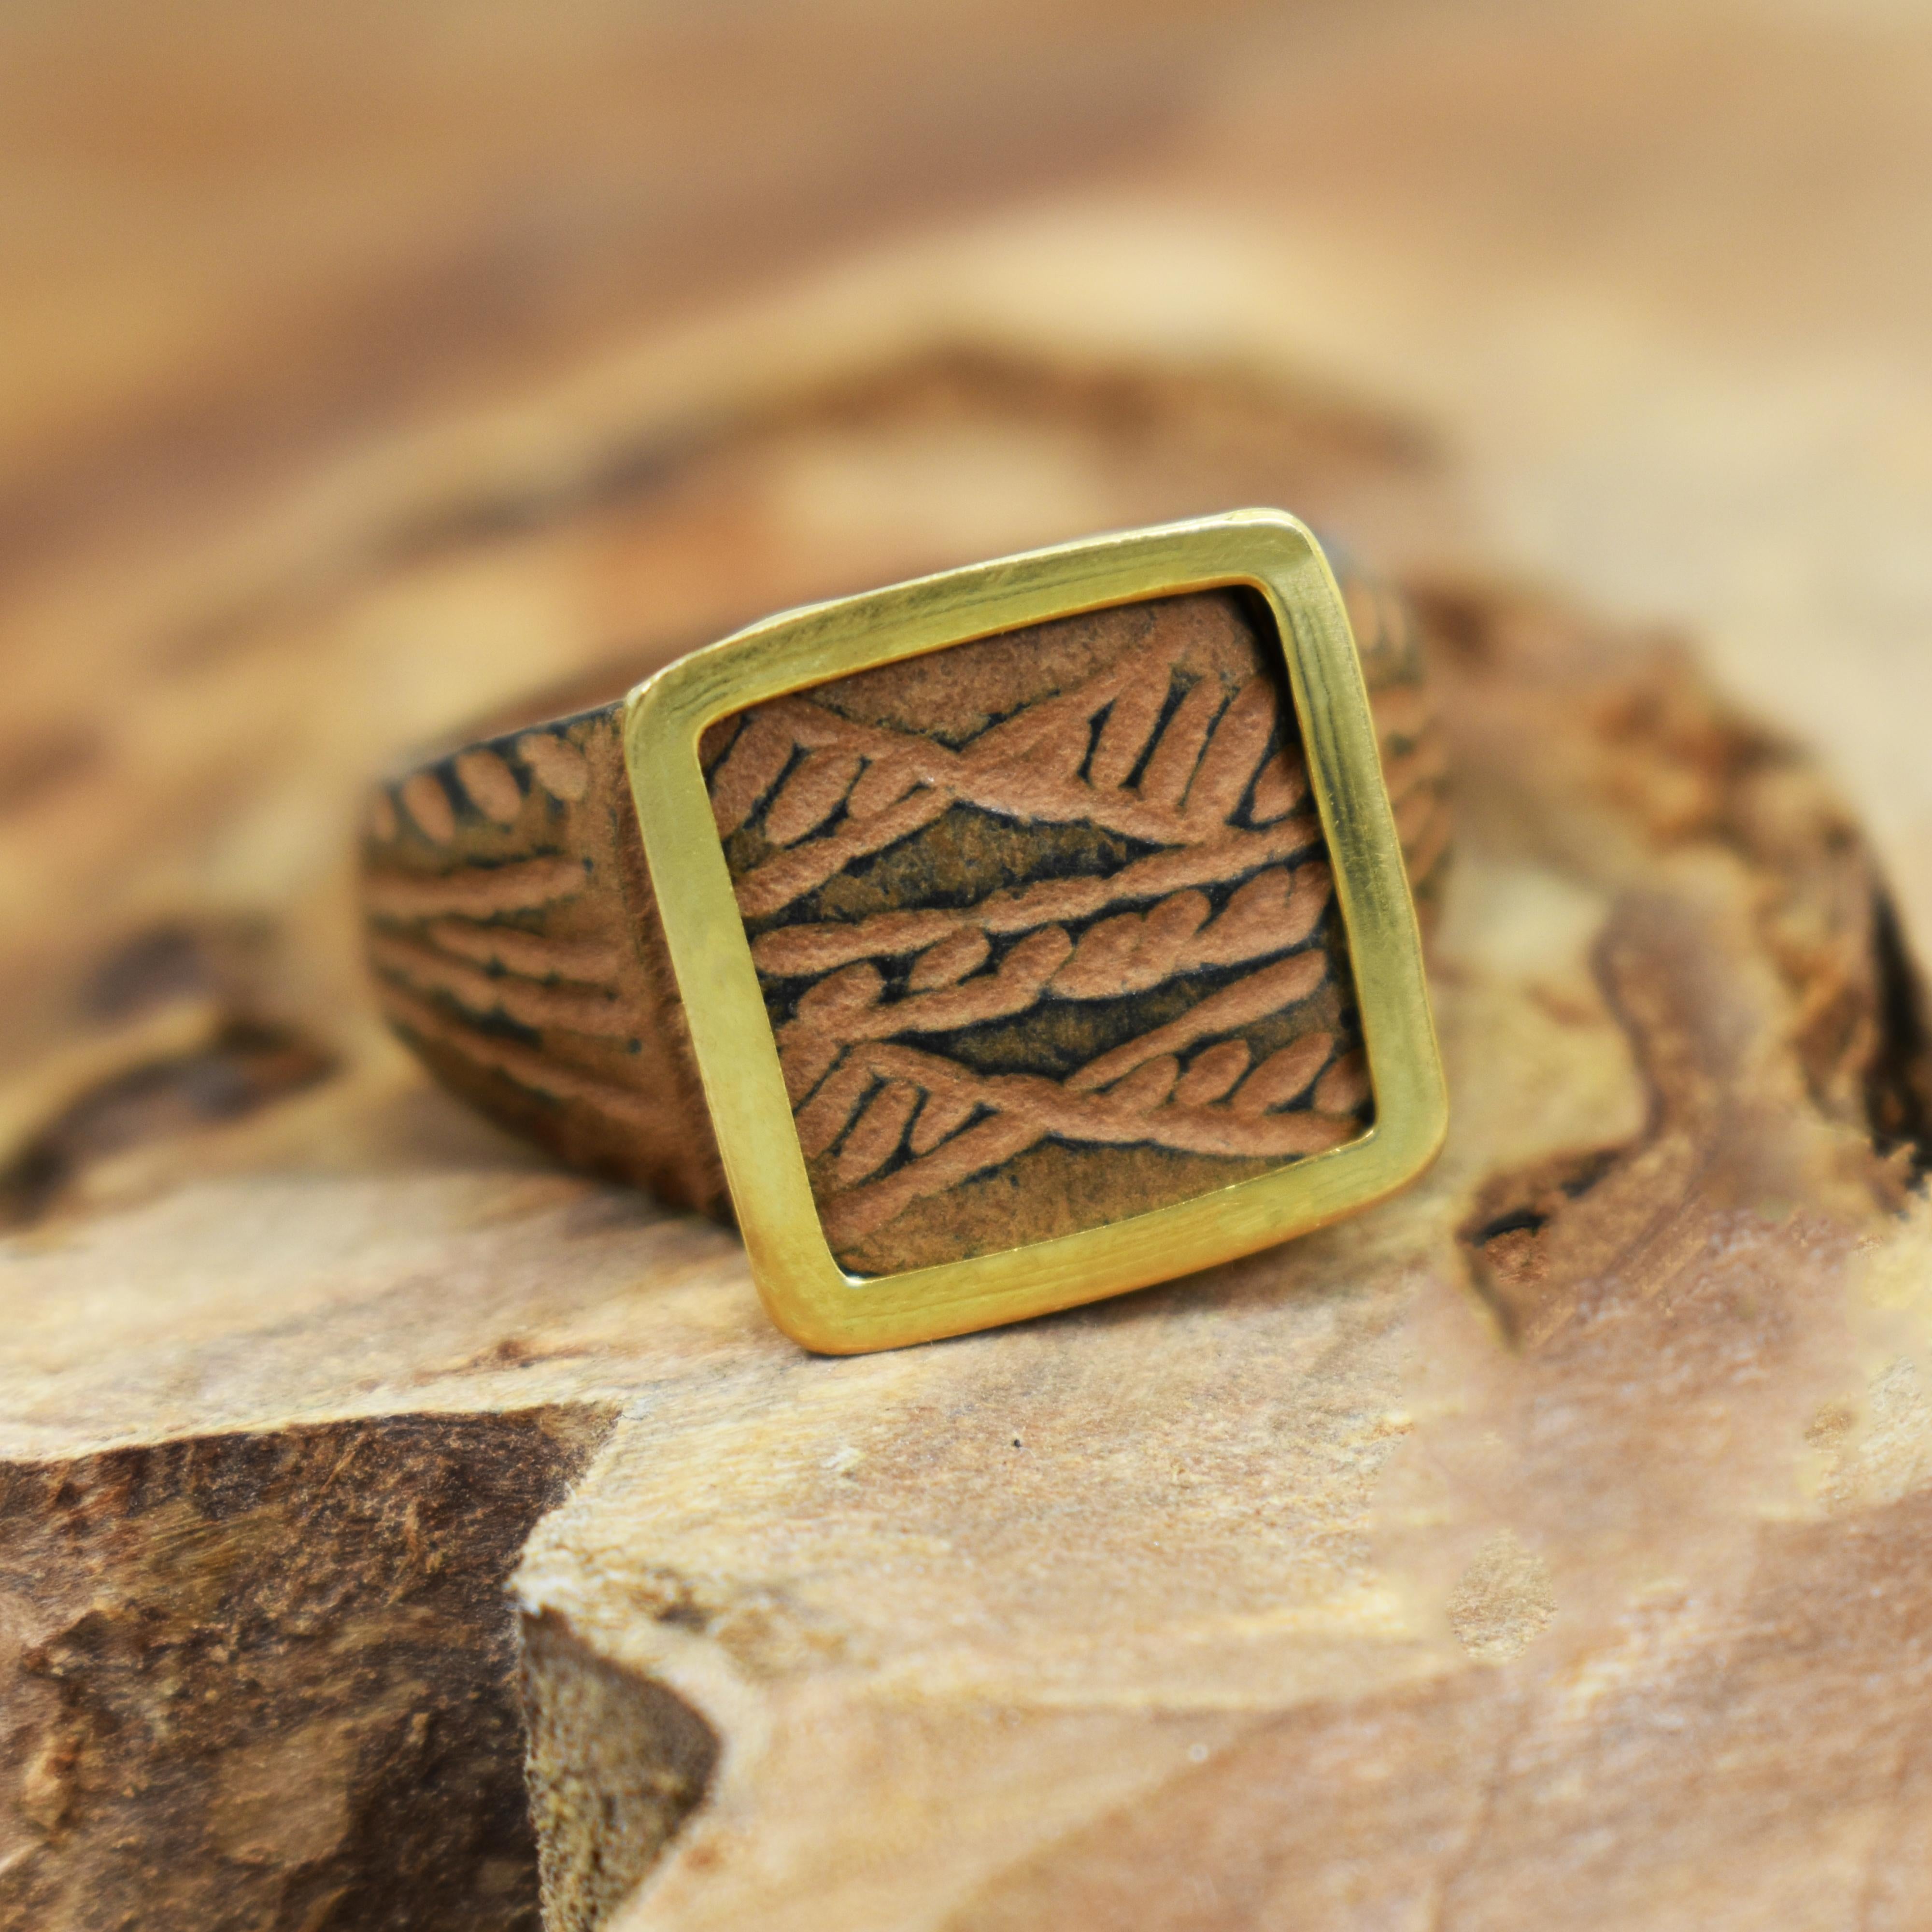 Authentic ancient Roman carved bronze signet ring (1st-4th century AD) with newly added 22k yellow gold bezel. Ring is approximately size 7. Square ring top measures 0.57 inches (14.5 mm) in width and length. May be worn as a ring or as a pendant on